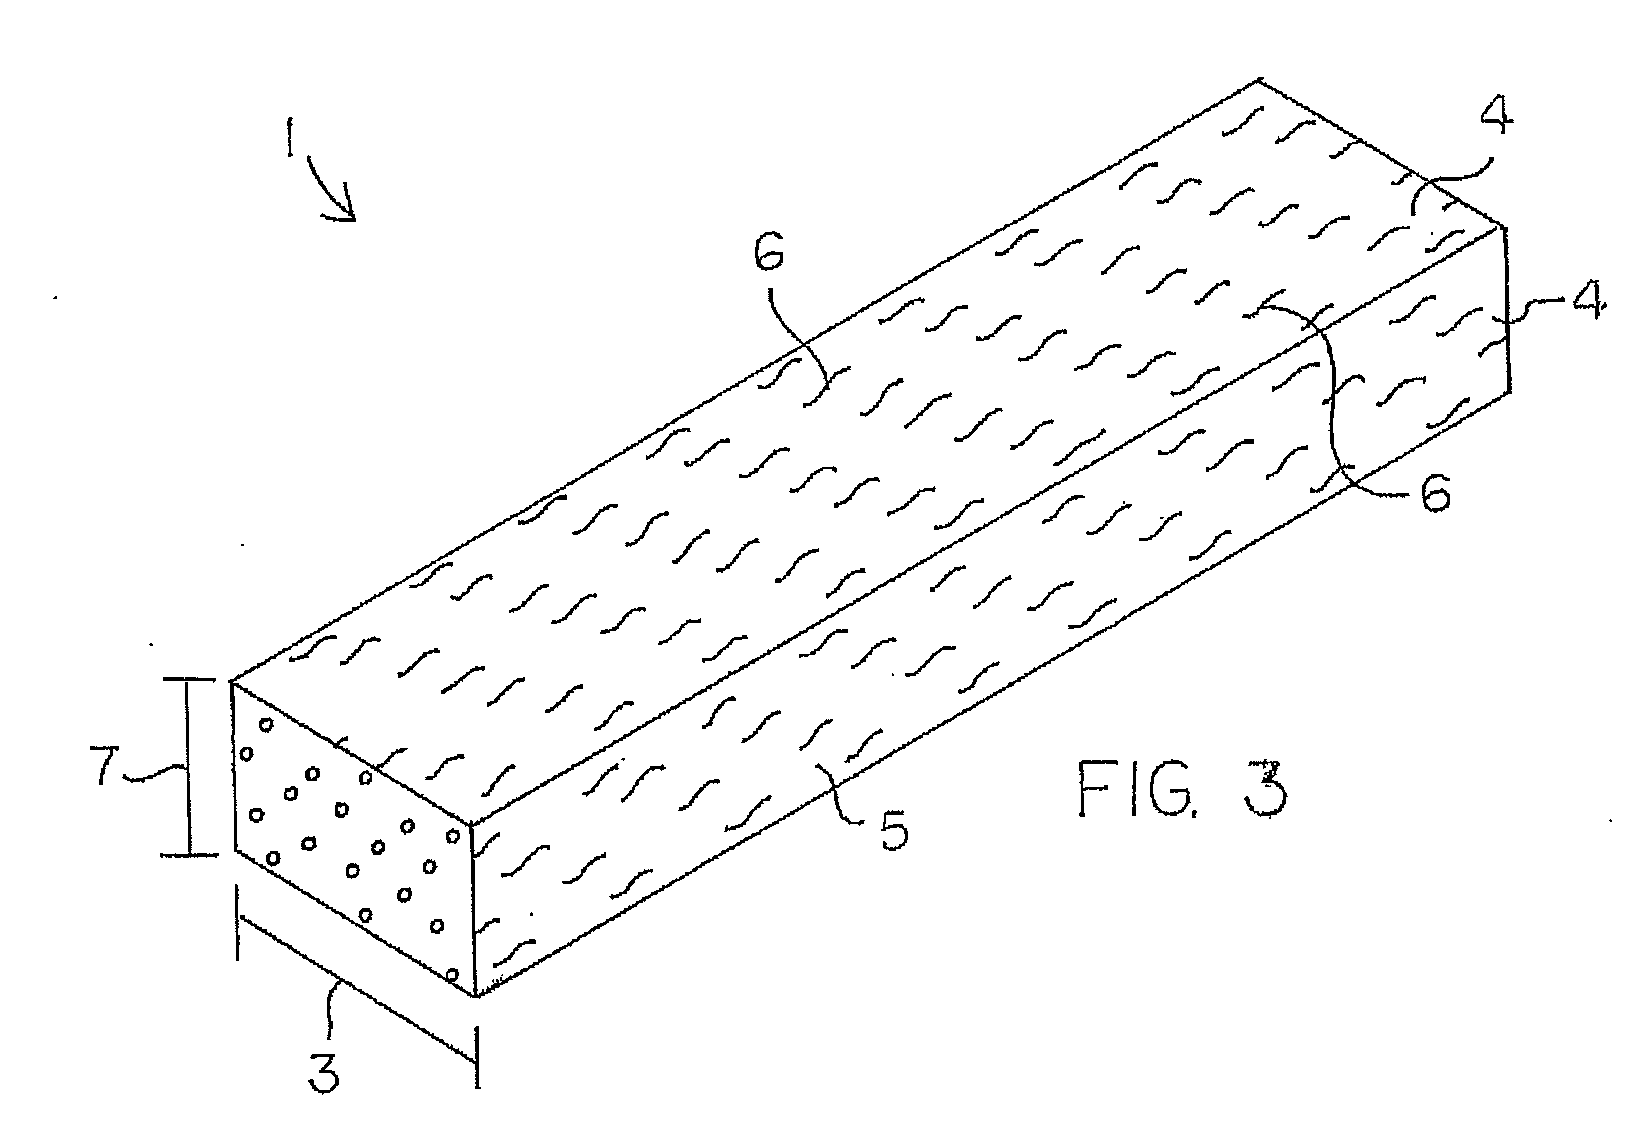 Method of making cellulosic filled thermoplastic composites of an anhydride containing copolymer